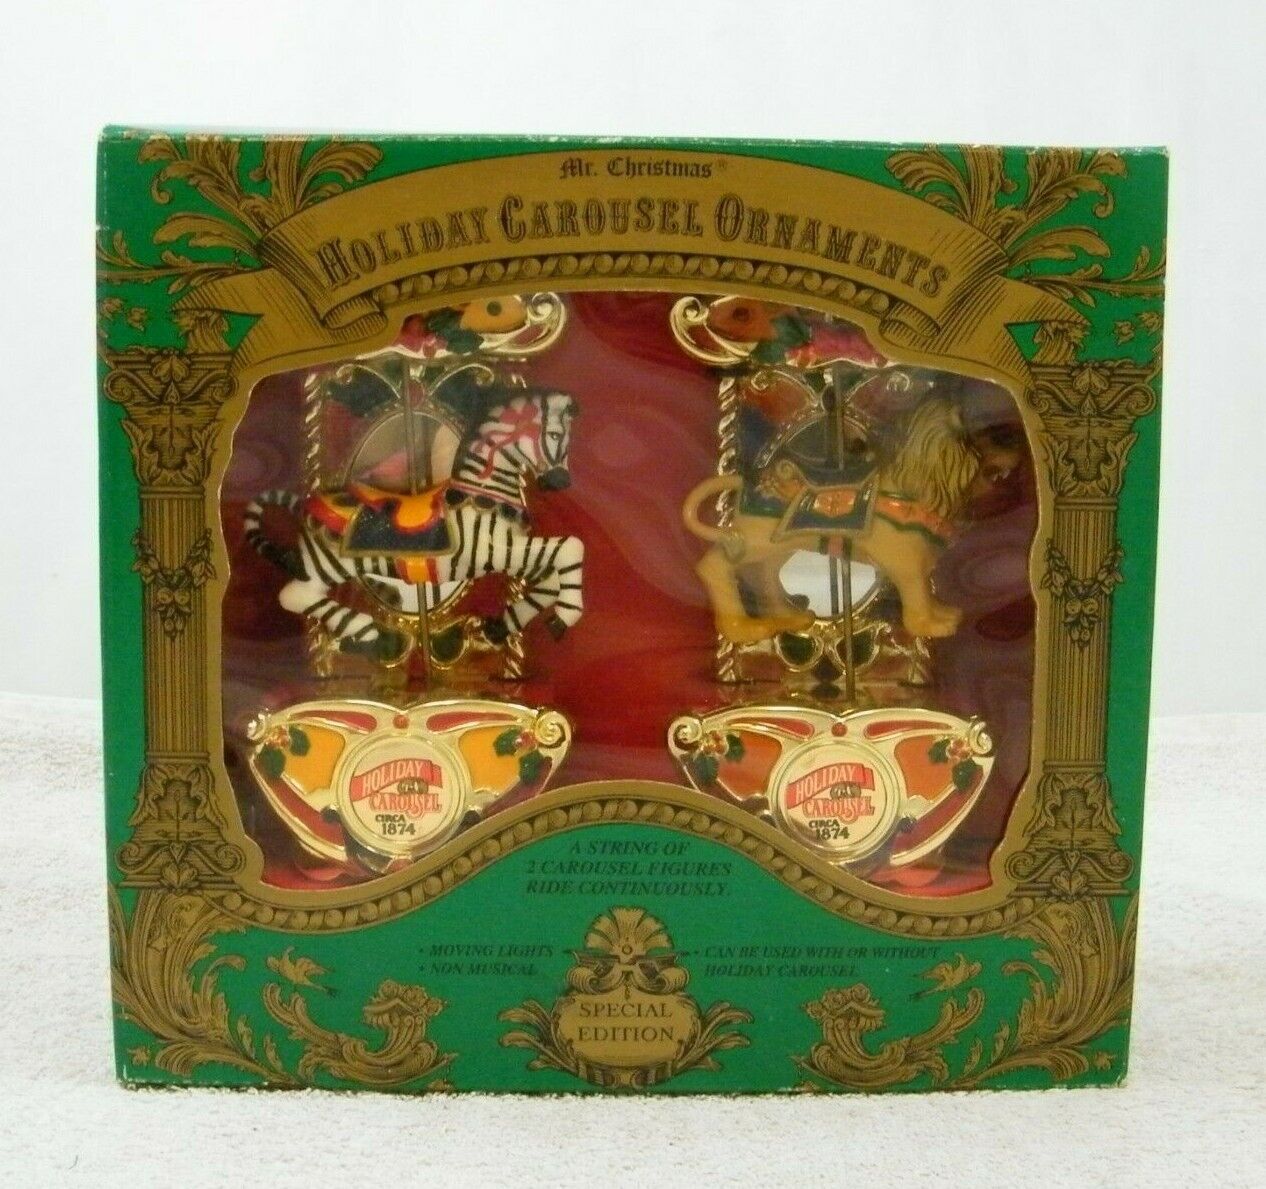 NEW 1993 MR CHRISTMAS SPECIAL EDITION HOLIDAY CAROUSEL ORNAMENTS ZEBRA & LION